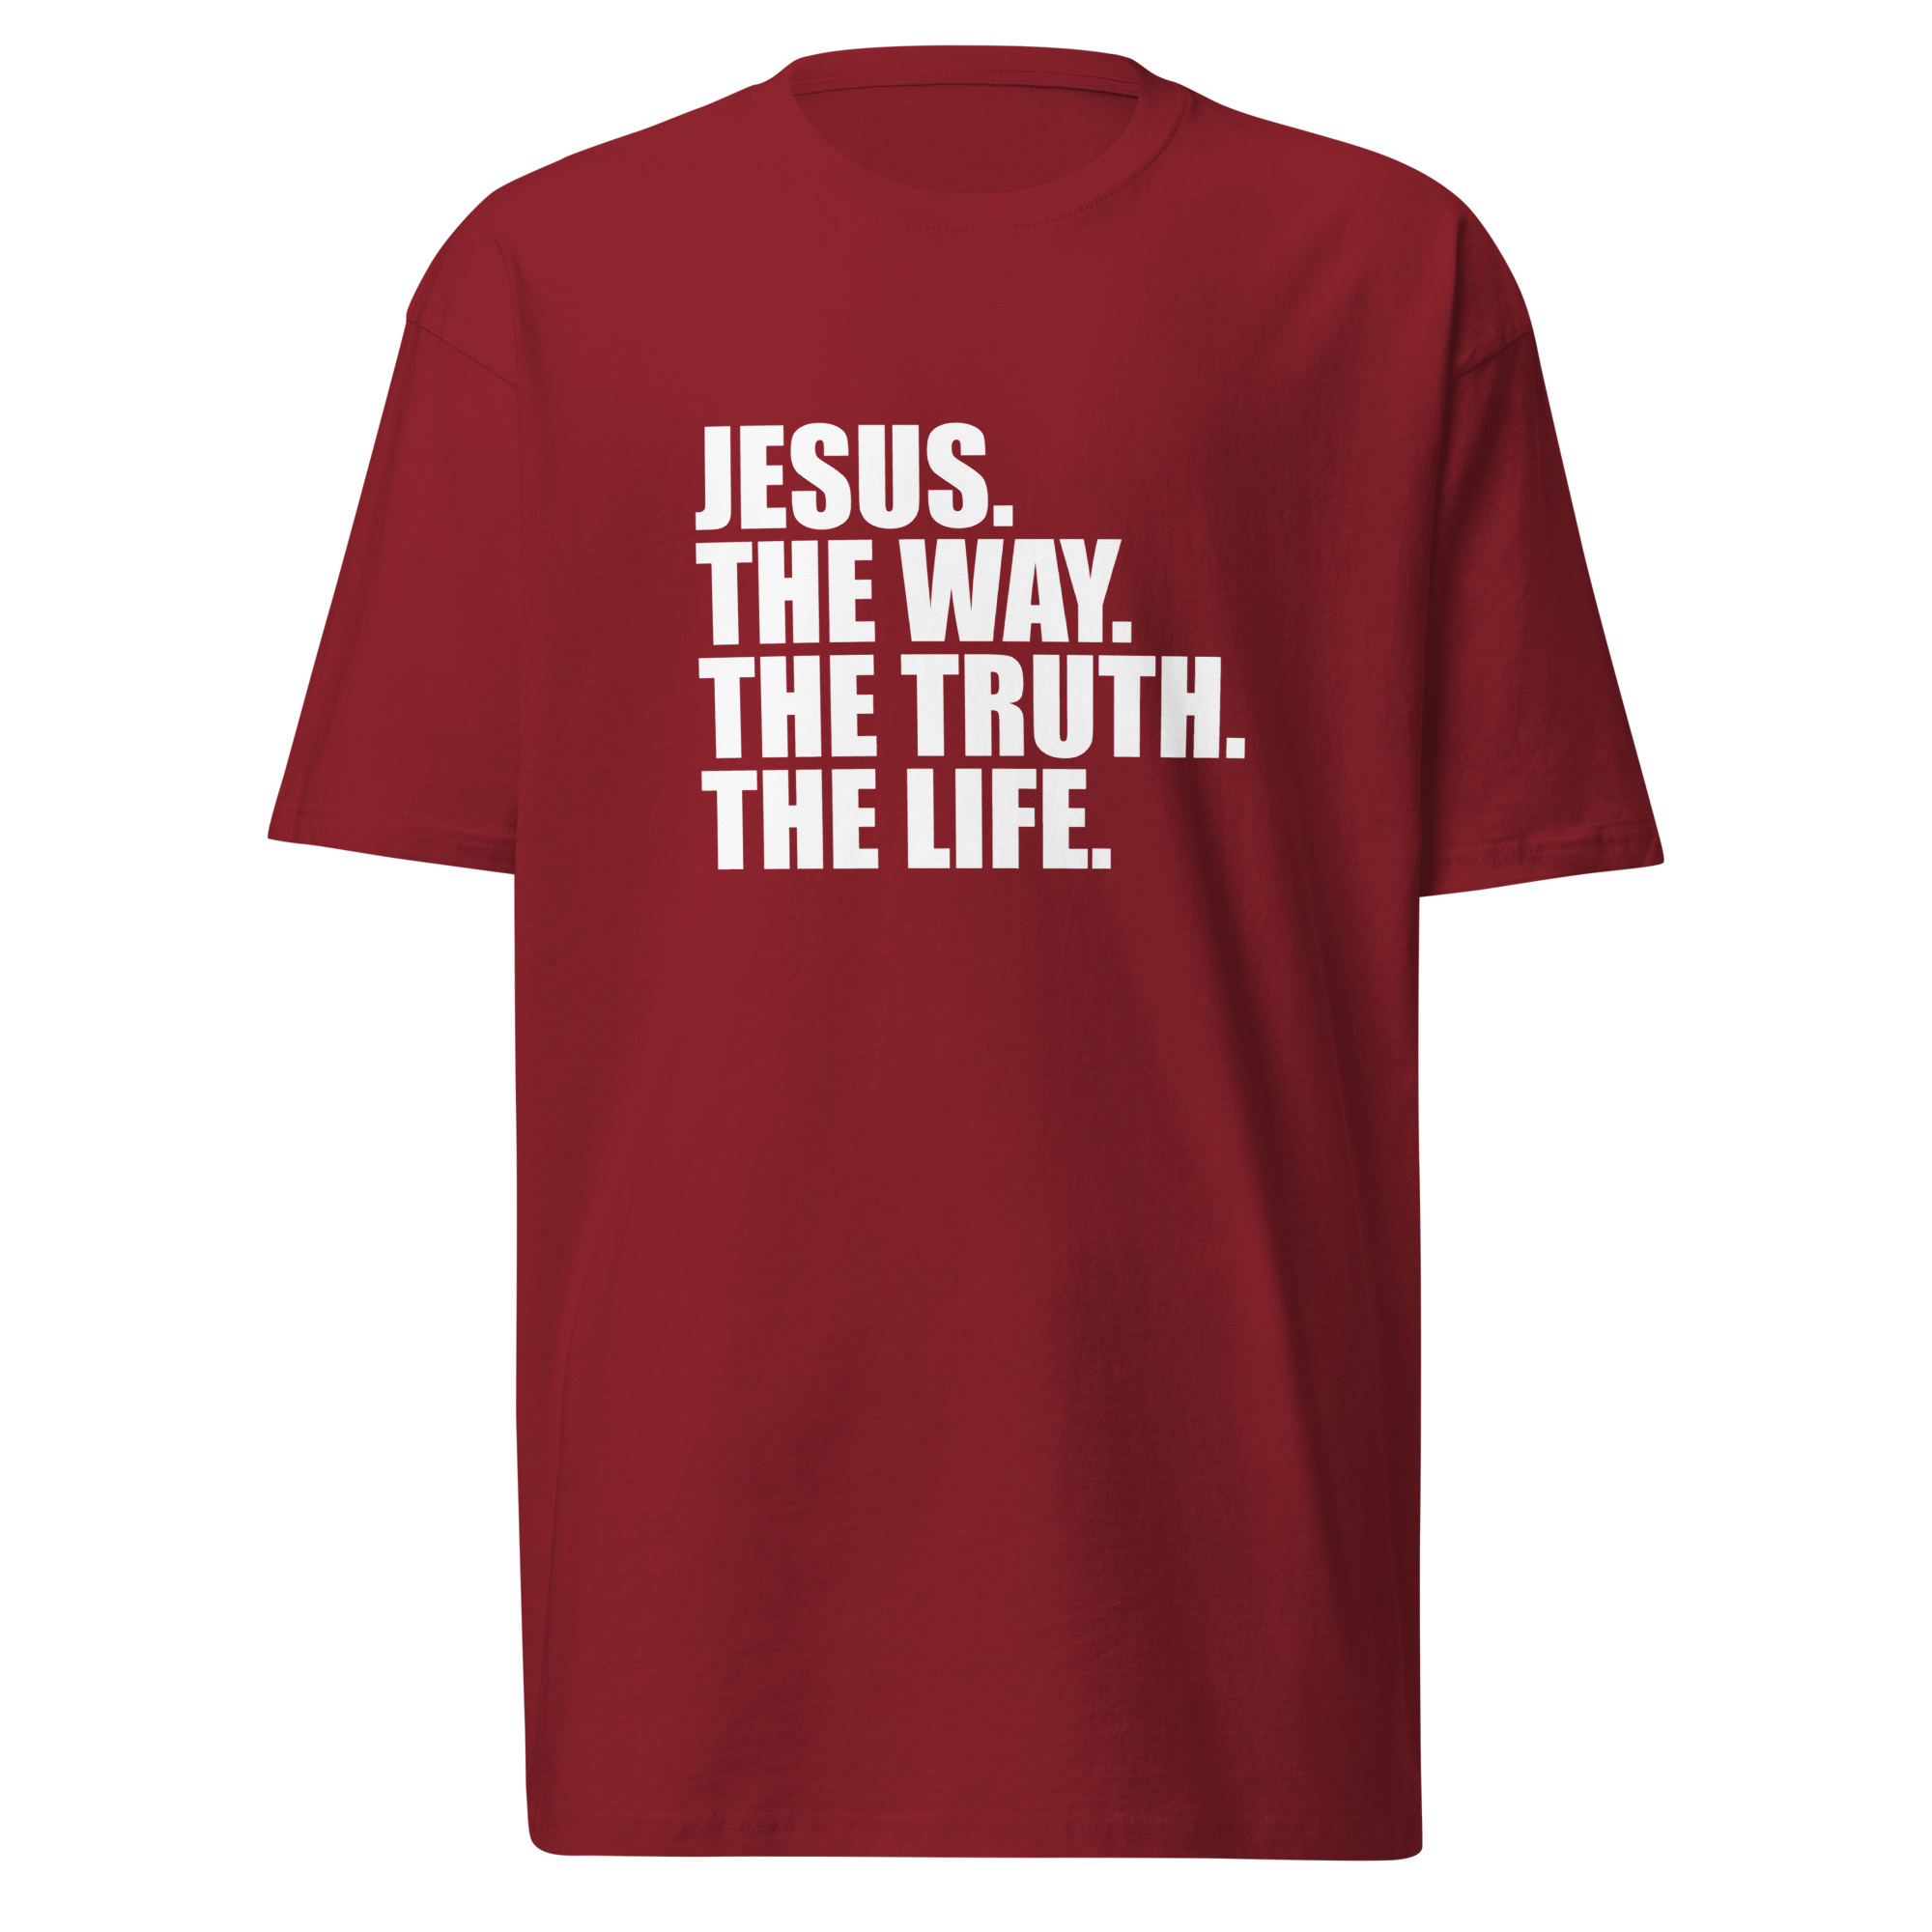 The Way. The Truth. The Life. T-Shirt - Brick Red / XL